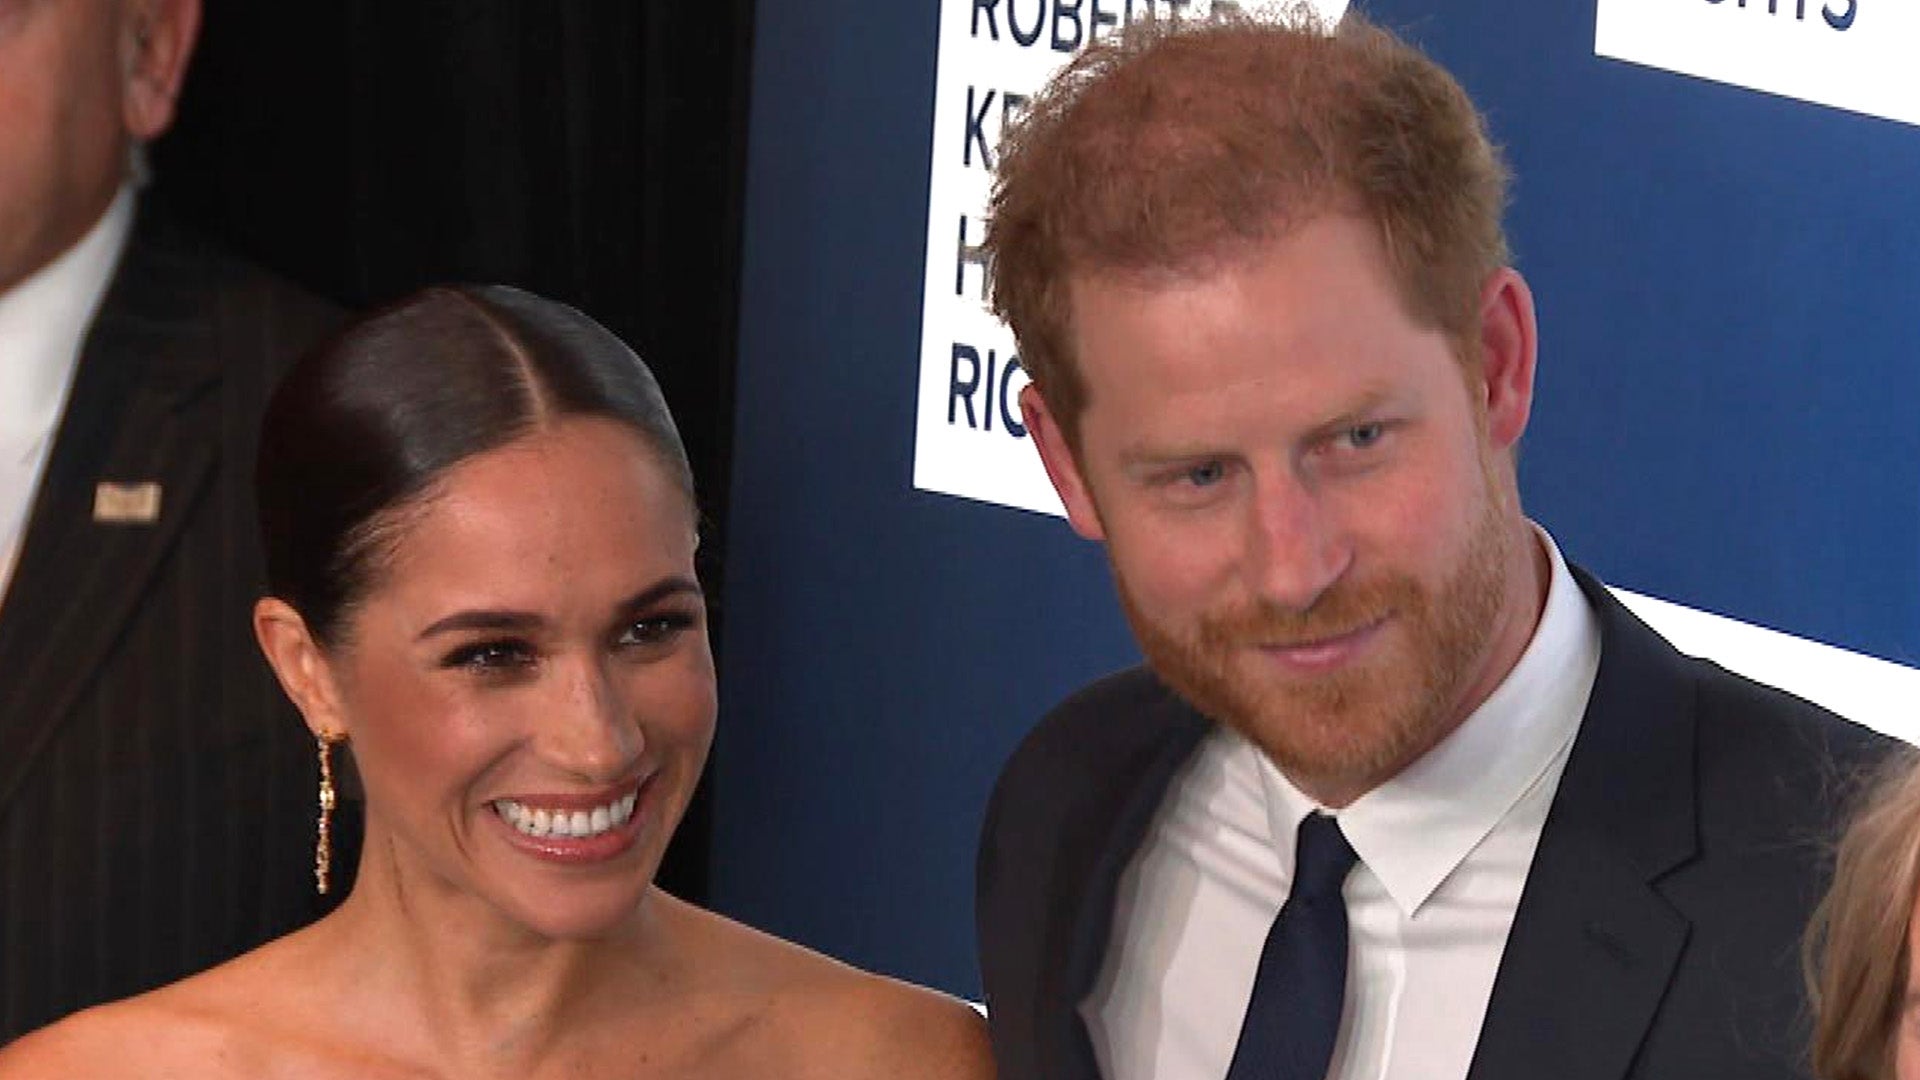 Prince Harry and Meghan Markle Step Out for Date Night Ahead of Netflix Docuseries Release